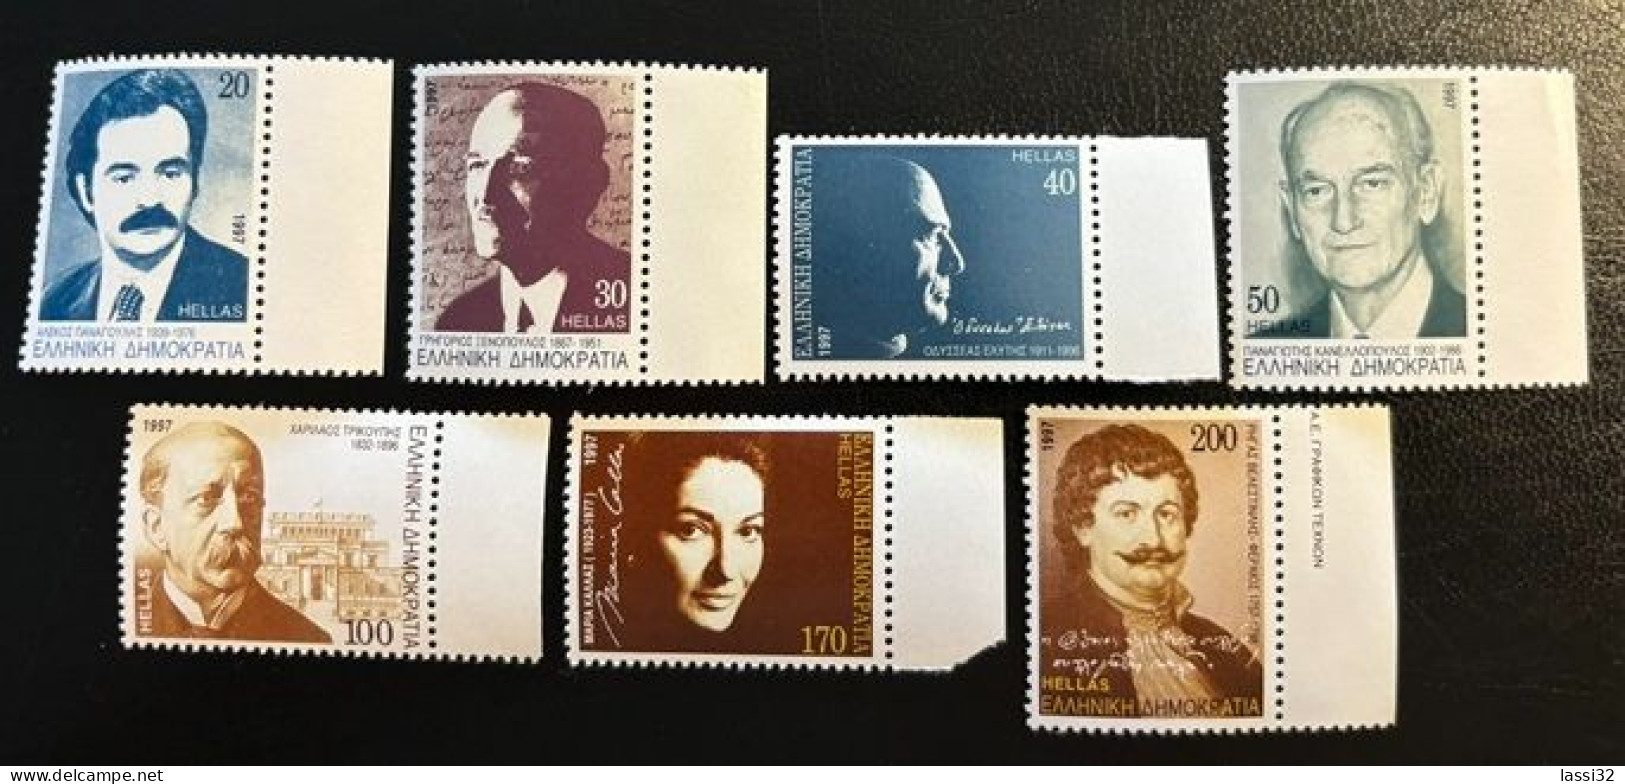 GREECE,1997, PERSONALITIES, MNH - Unused Stamps